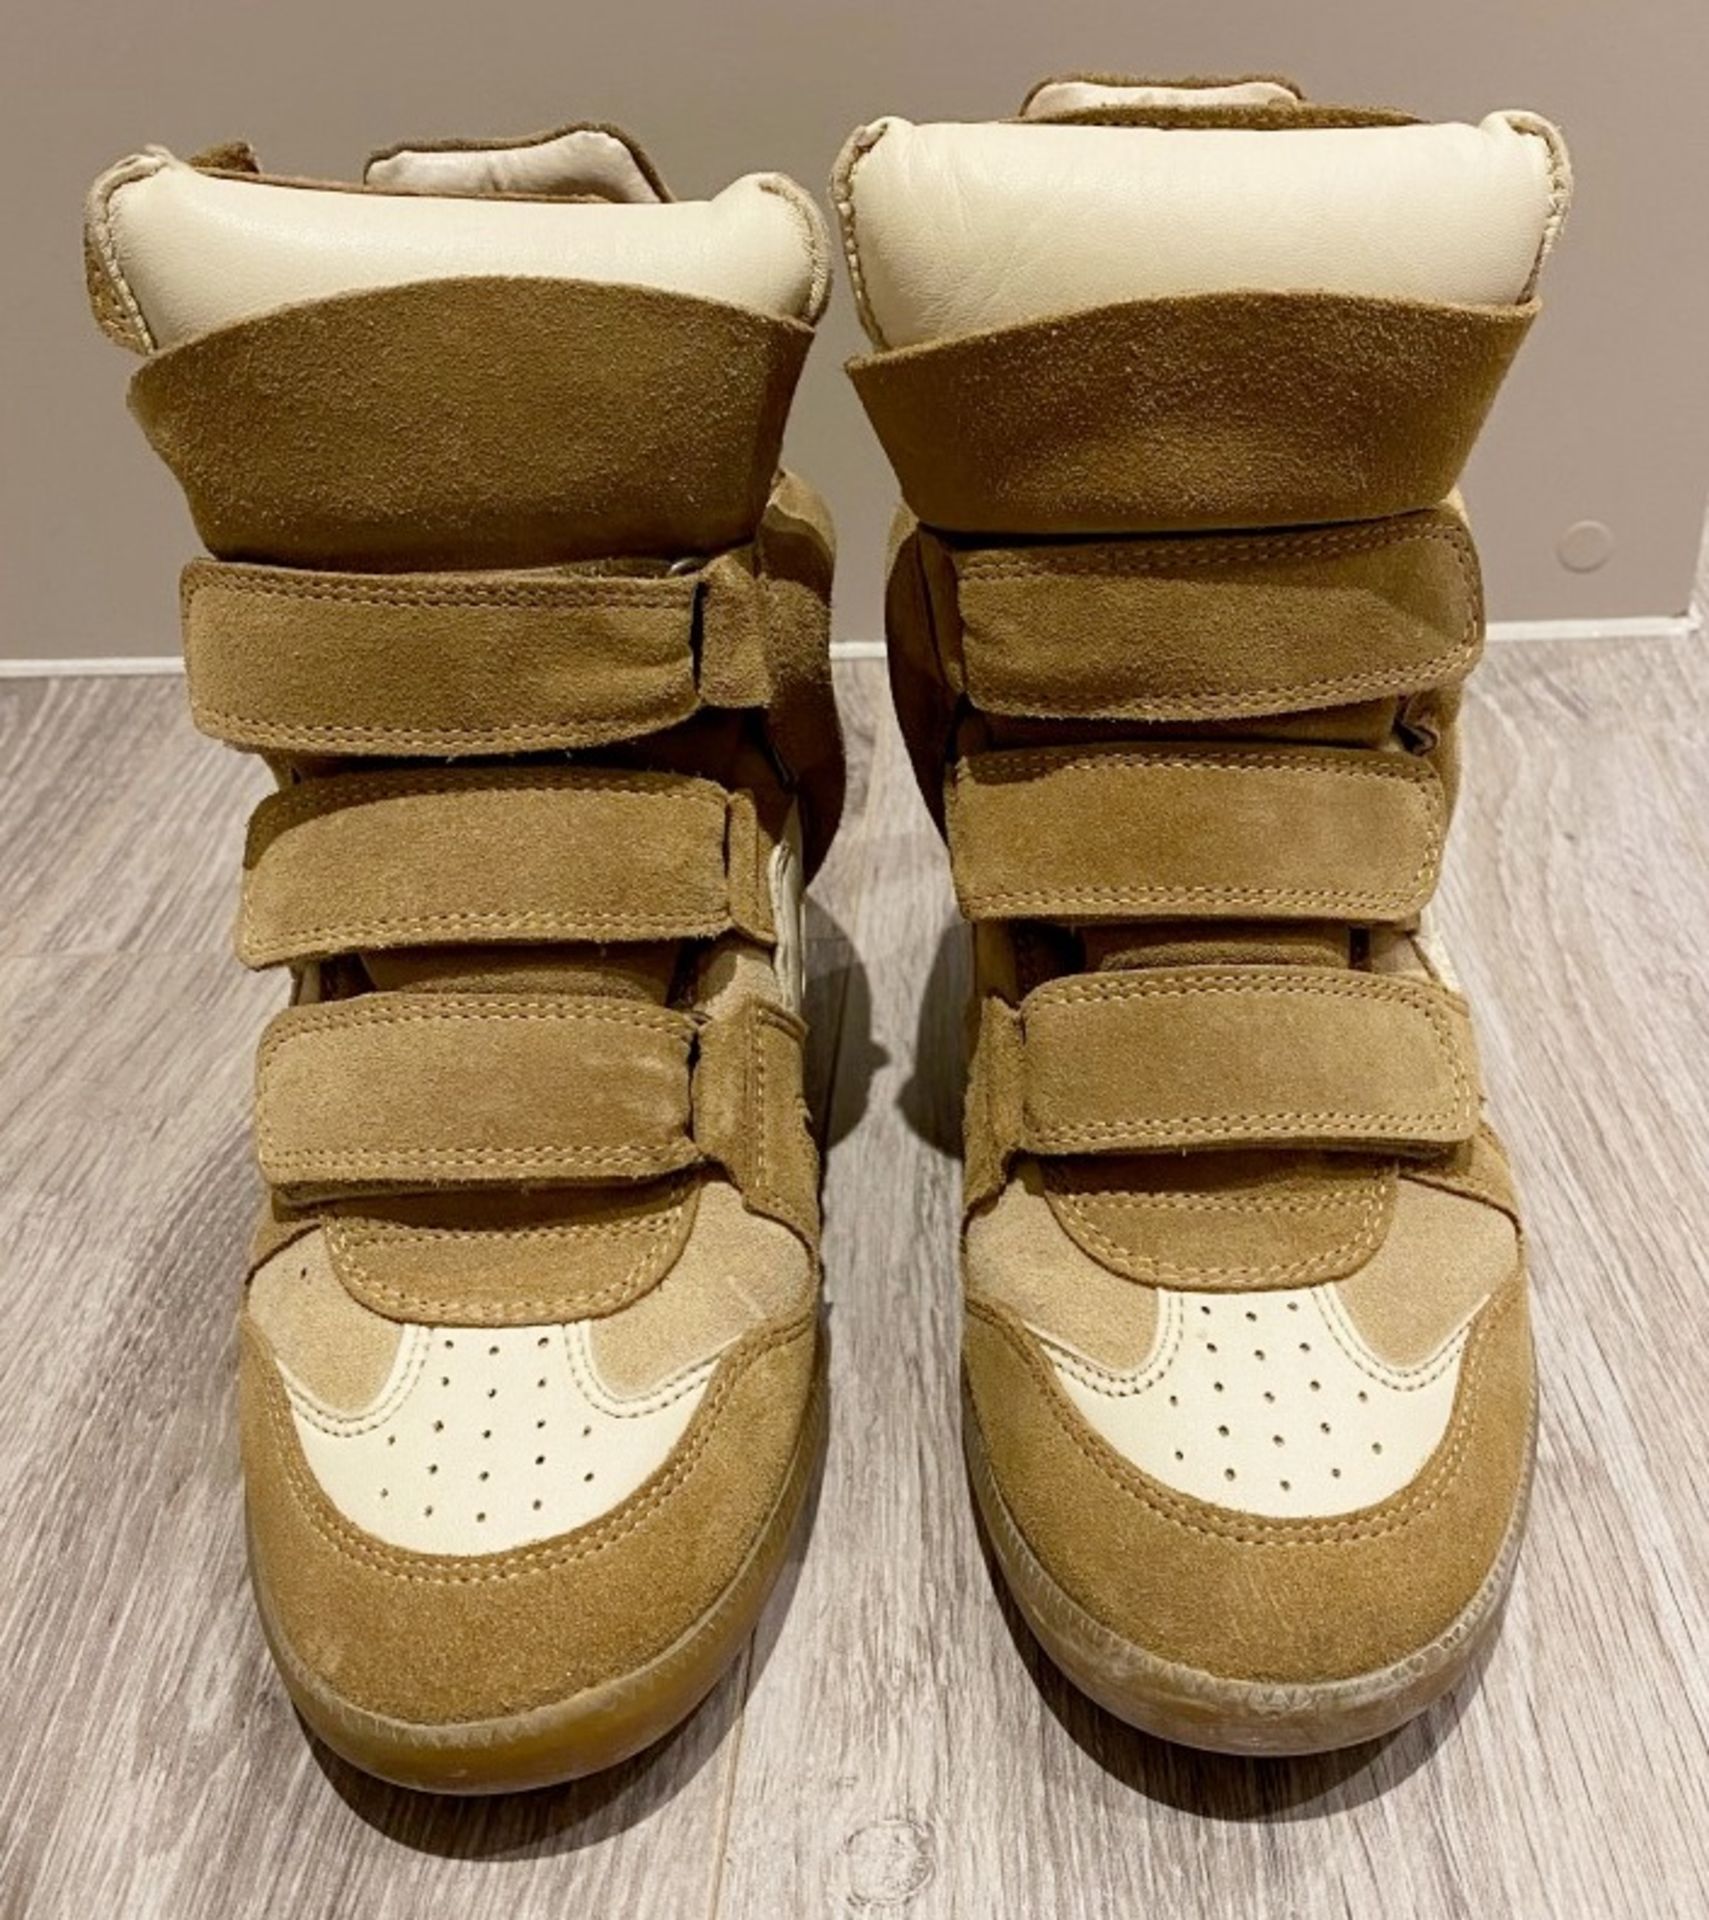 1 x Pair Of Genuine Isabel Marant Boots In Tan - Size: 36 - Preowned in Good Condition - Ref: LOT40 - Image 3 of 4